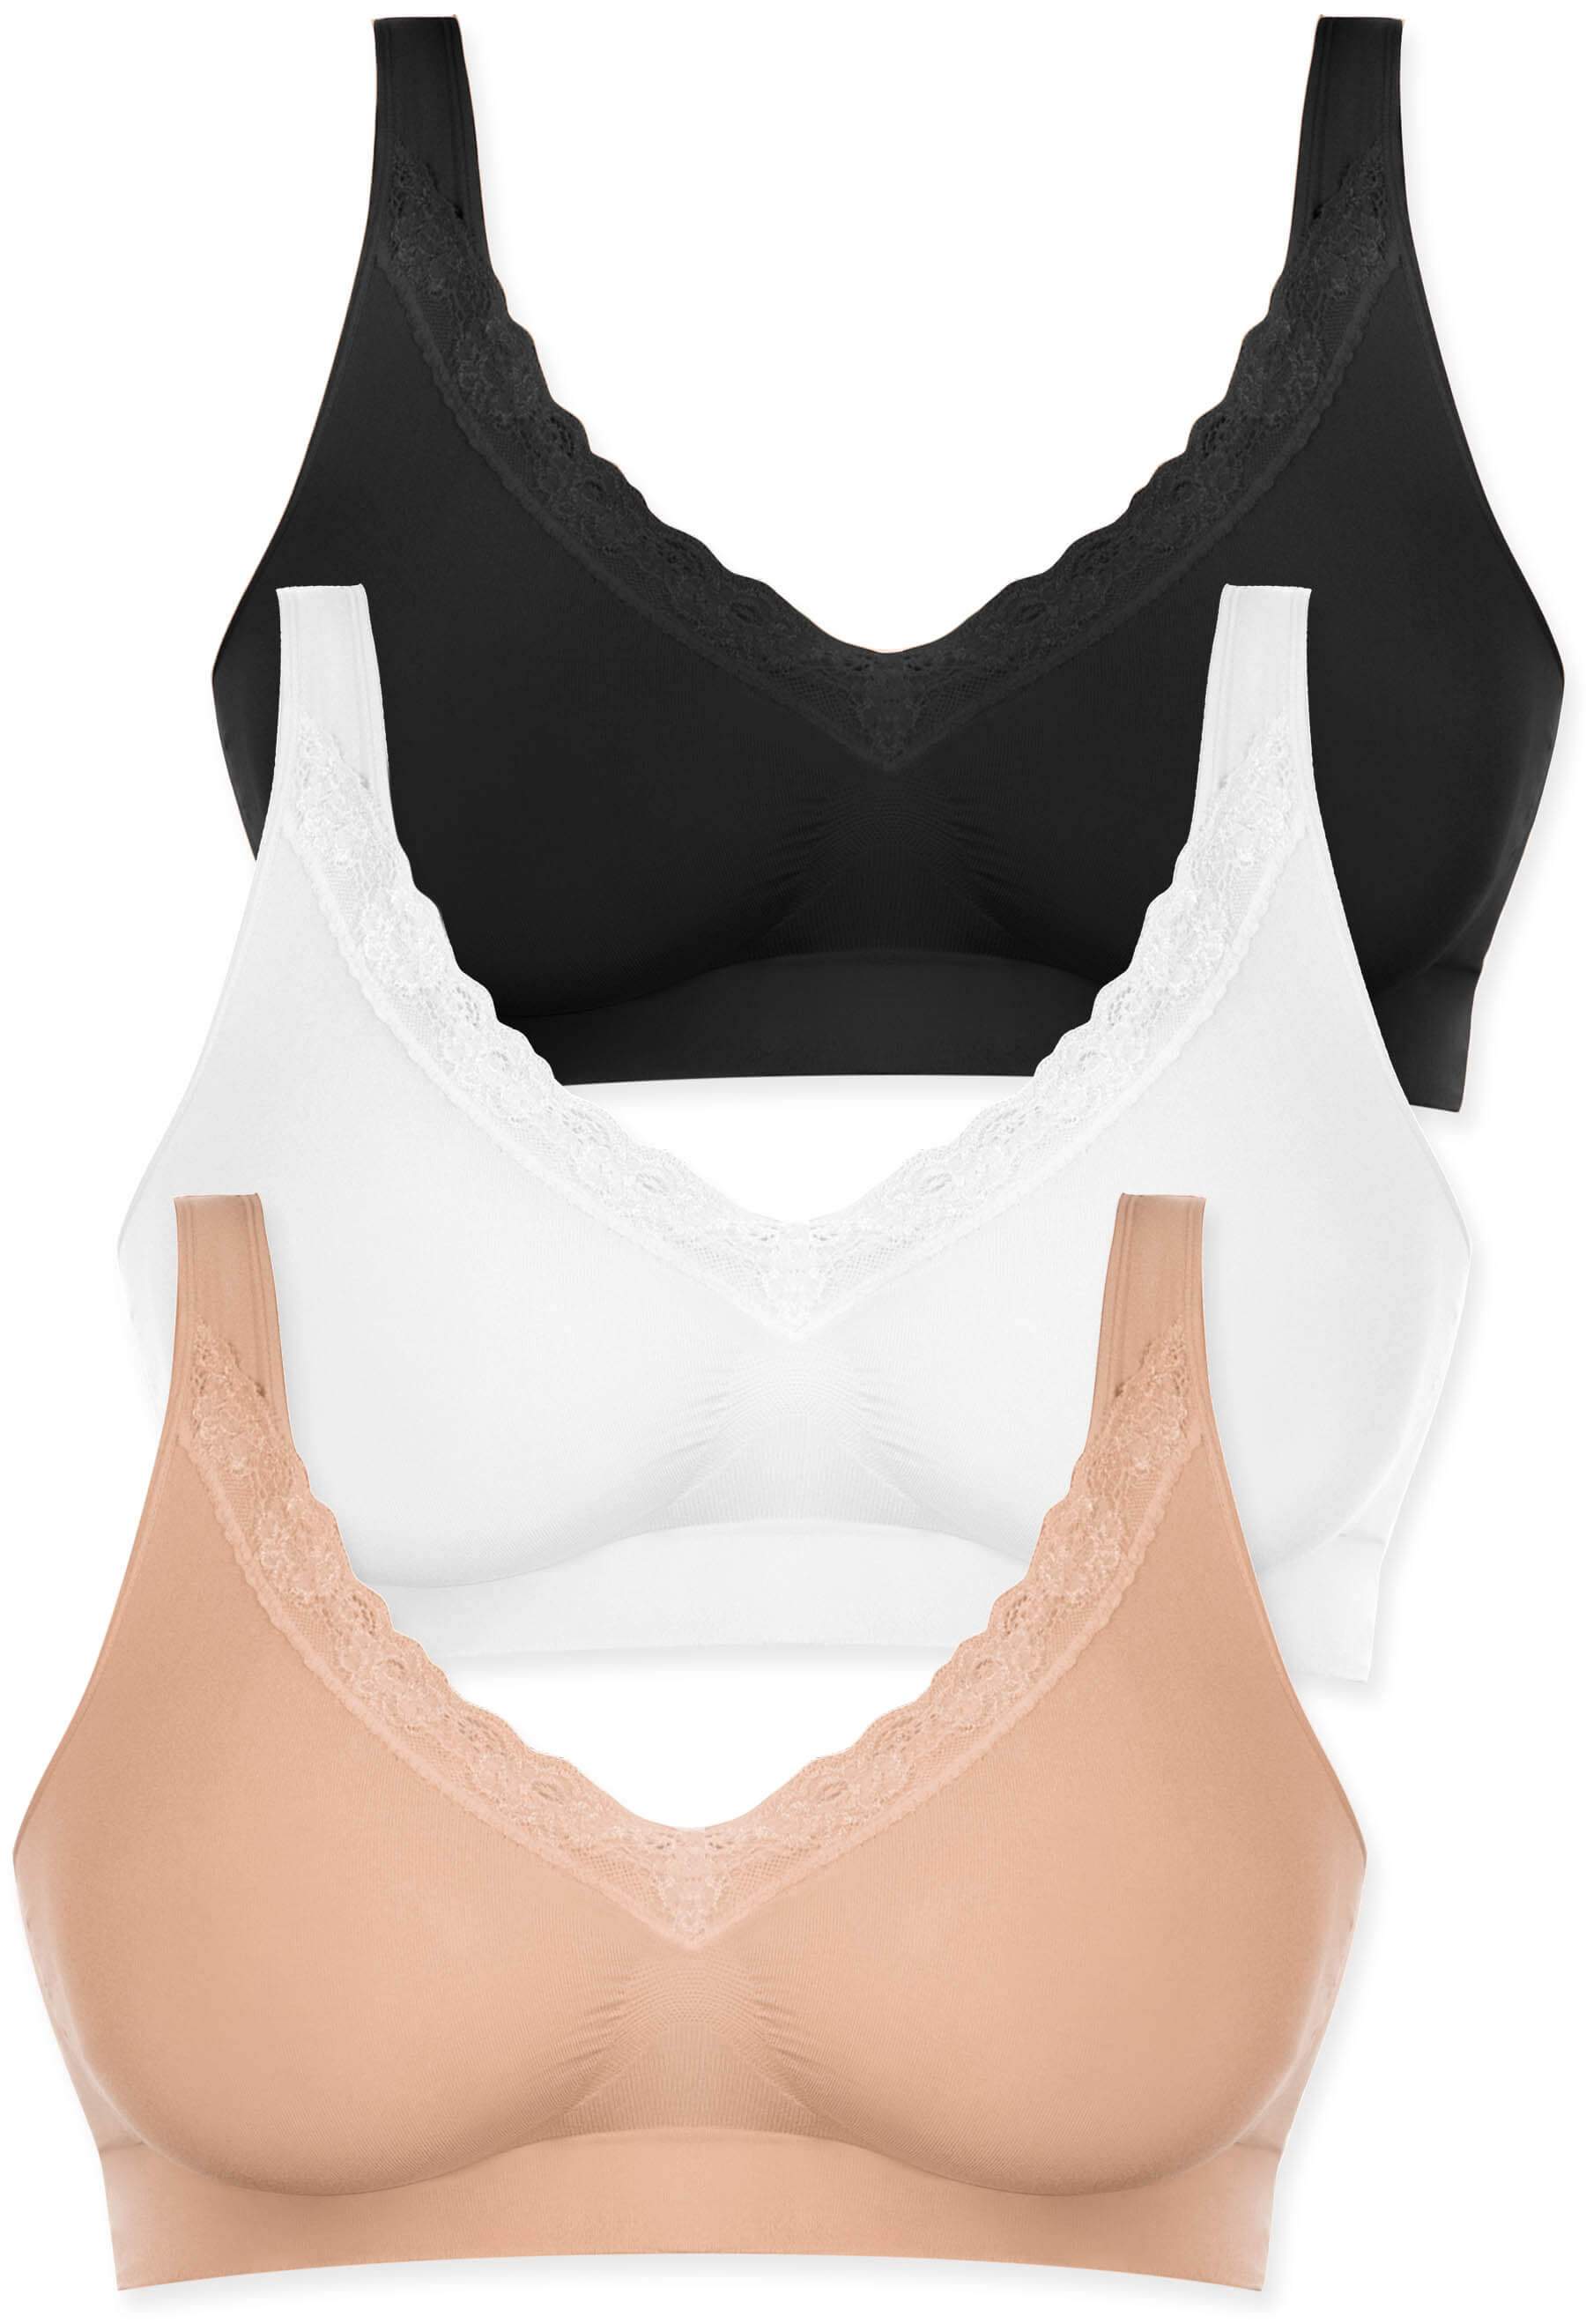 Cotton Lace Sleep Bra 3 Pack, Fits Up to Cup E